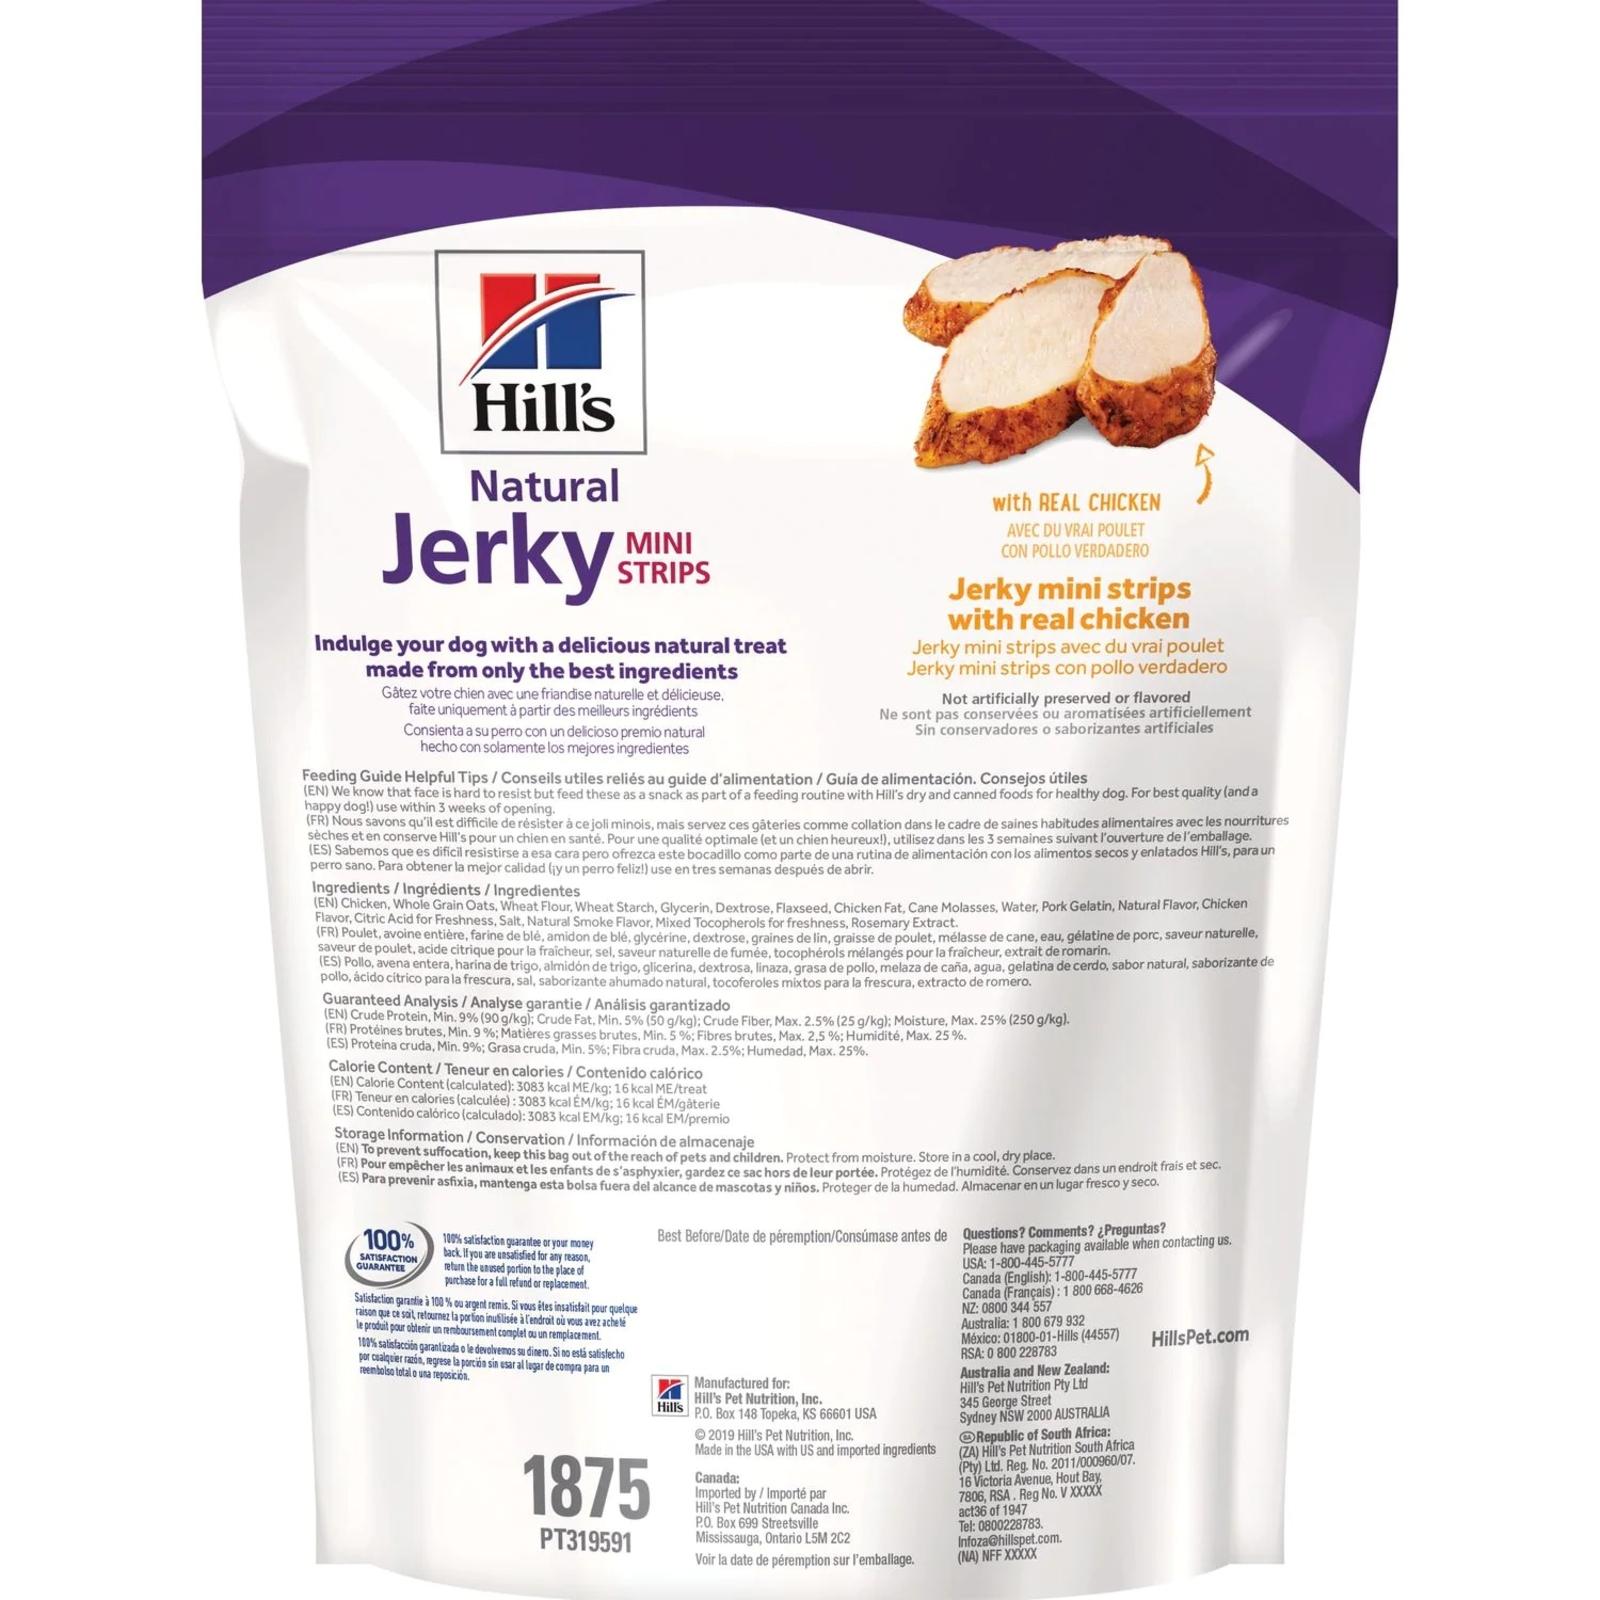 Hill's Natural Jerky Mini-Strips with Real Chicken Dog Treats